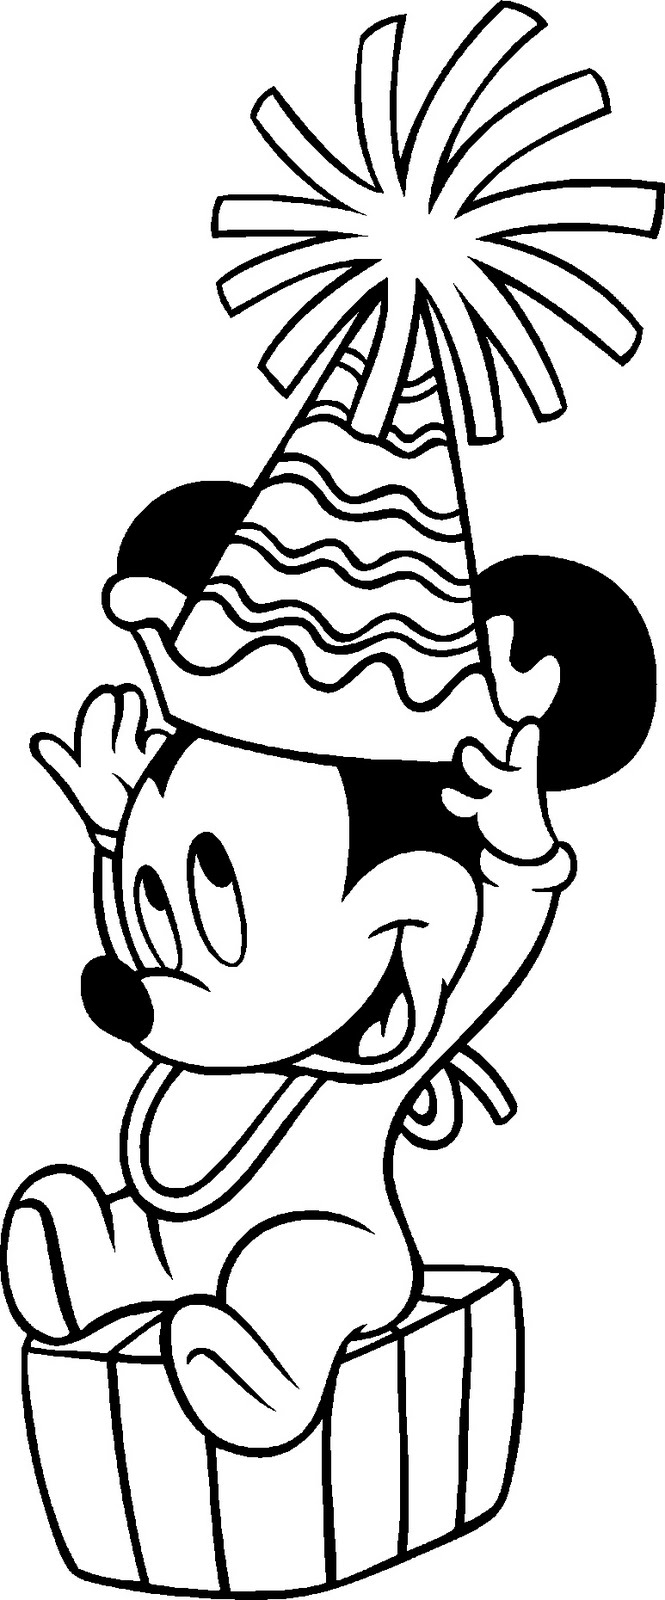 Cool Mickey Mouse Coloring Pages Printables 51